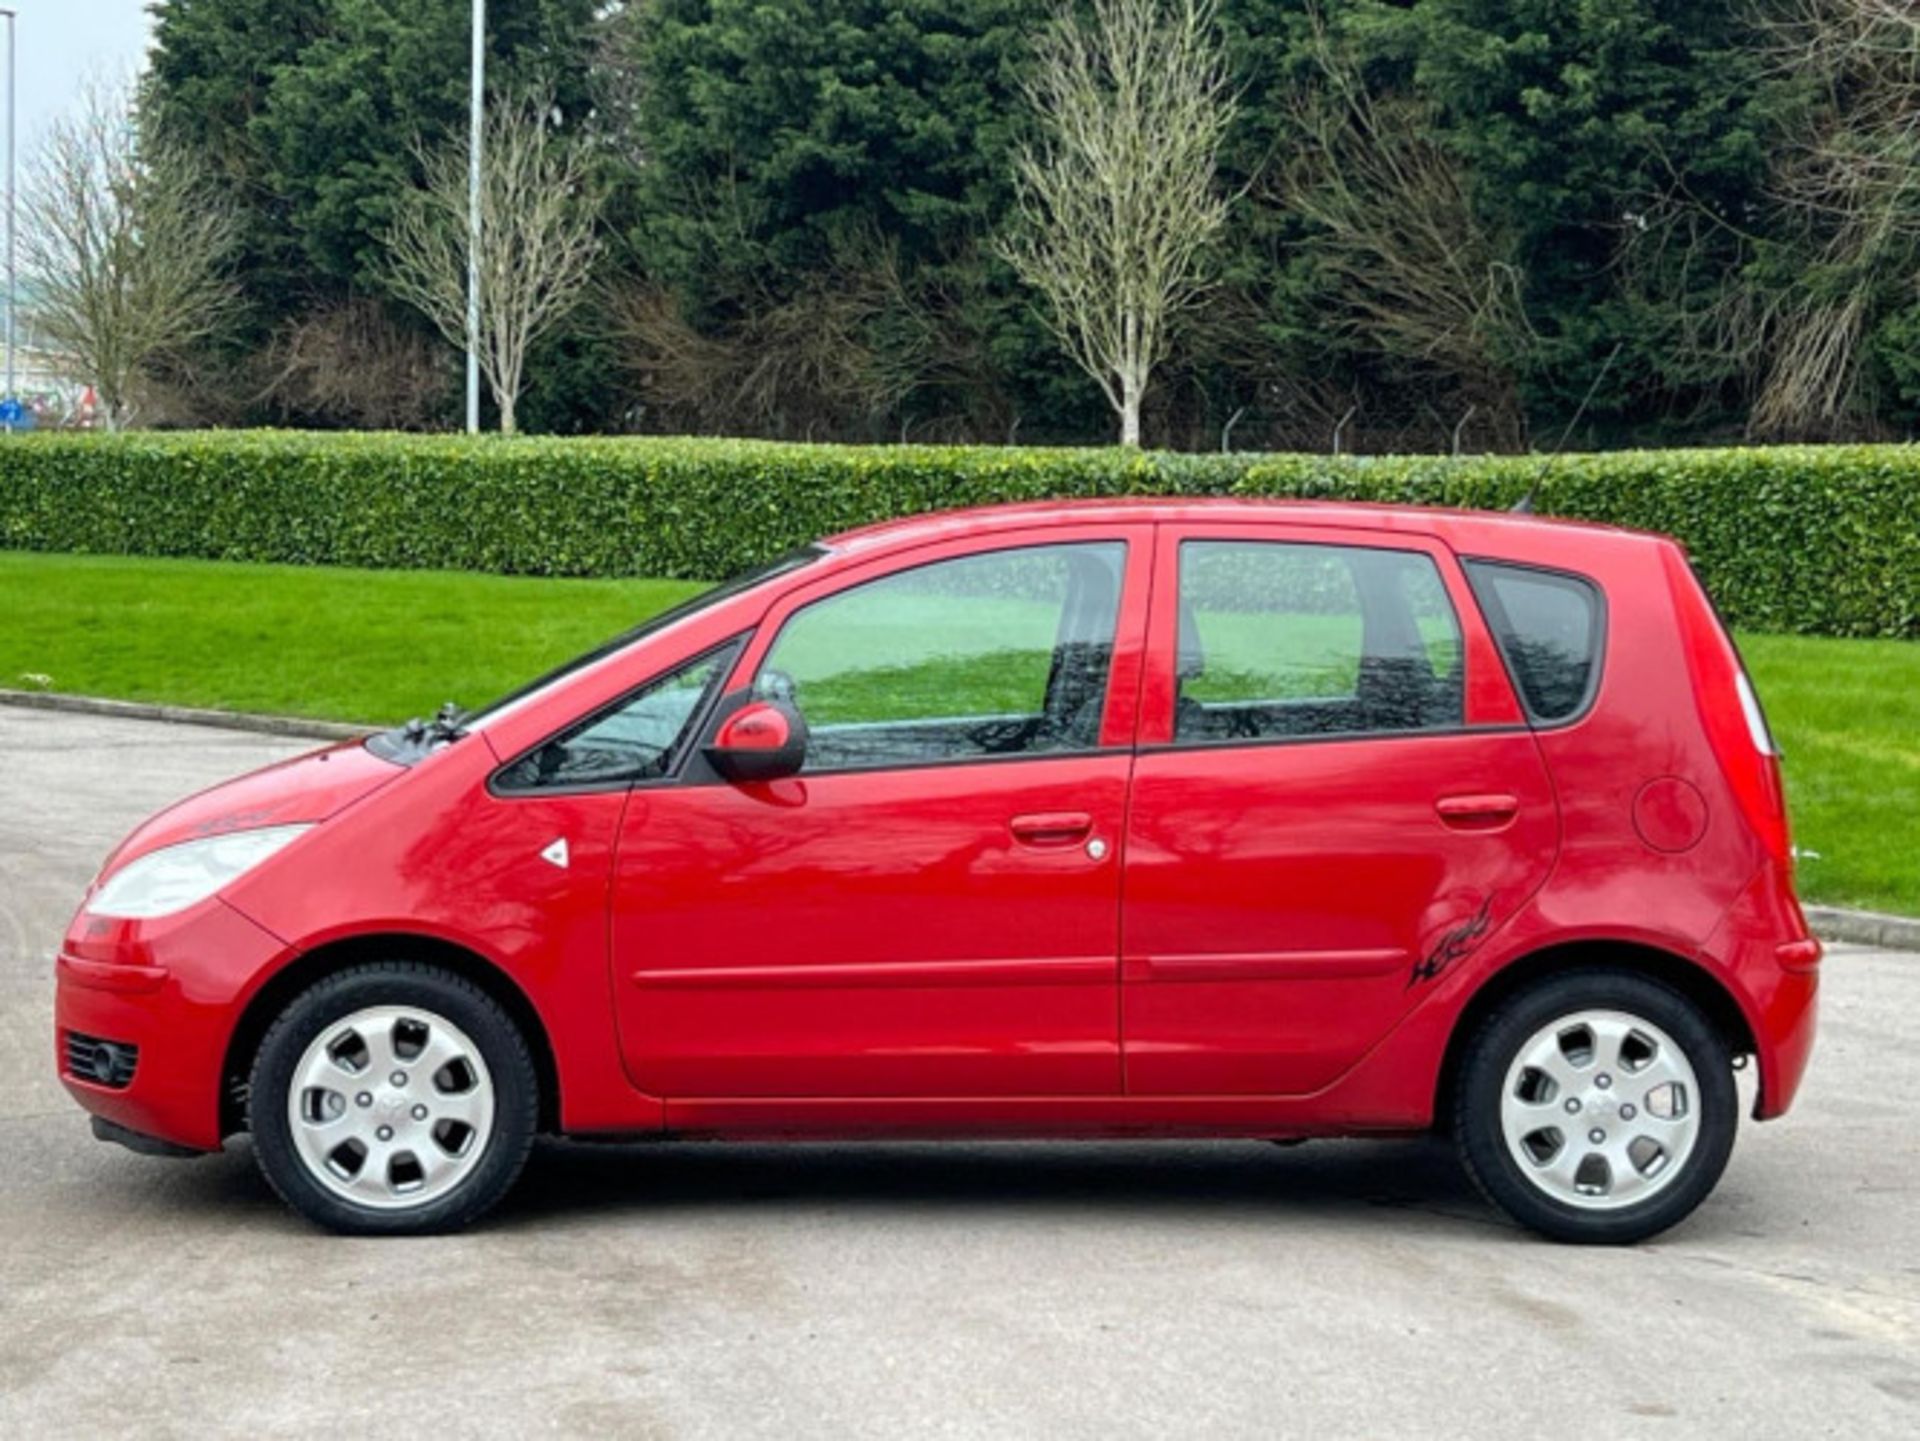 2007 MITSUBISHI COLT 1.5 DI-D DIESEL AUTOMATIC >>--NO VAT ON HAMMER--<< - Image 122 of 127